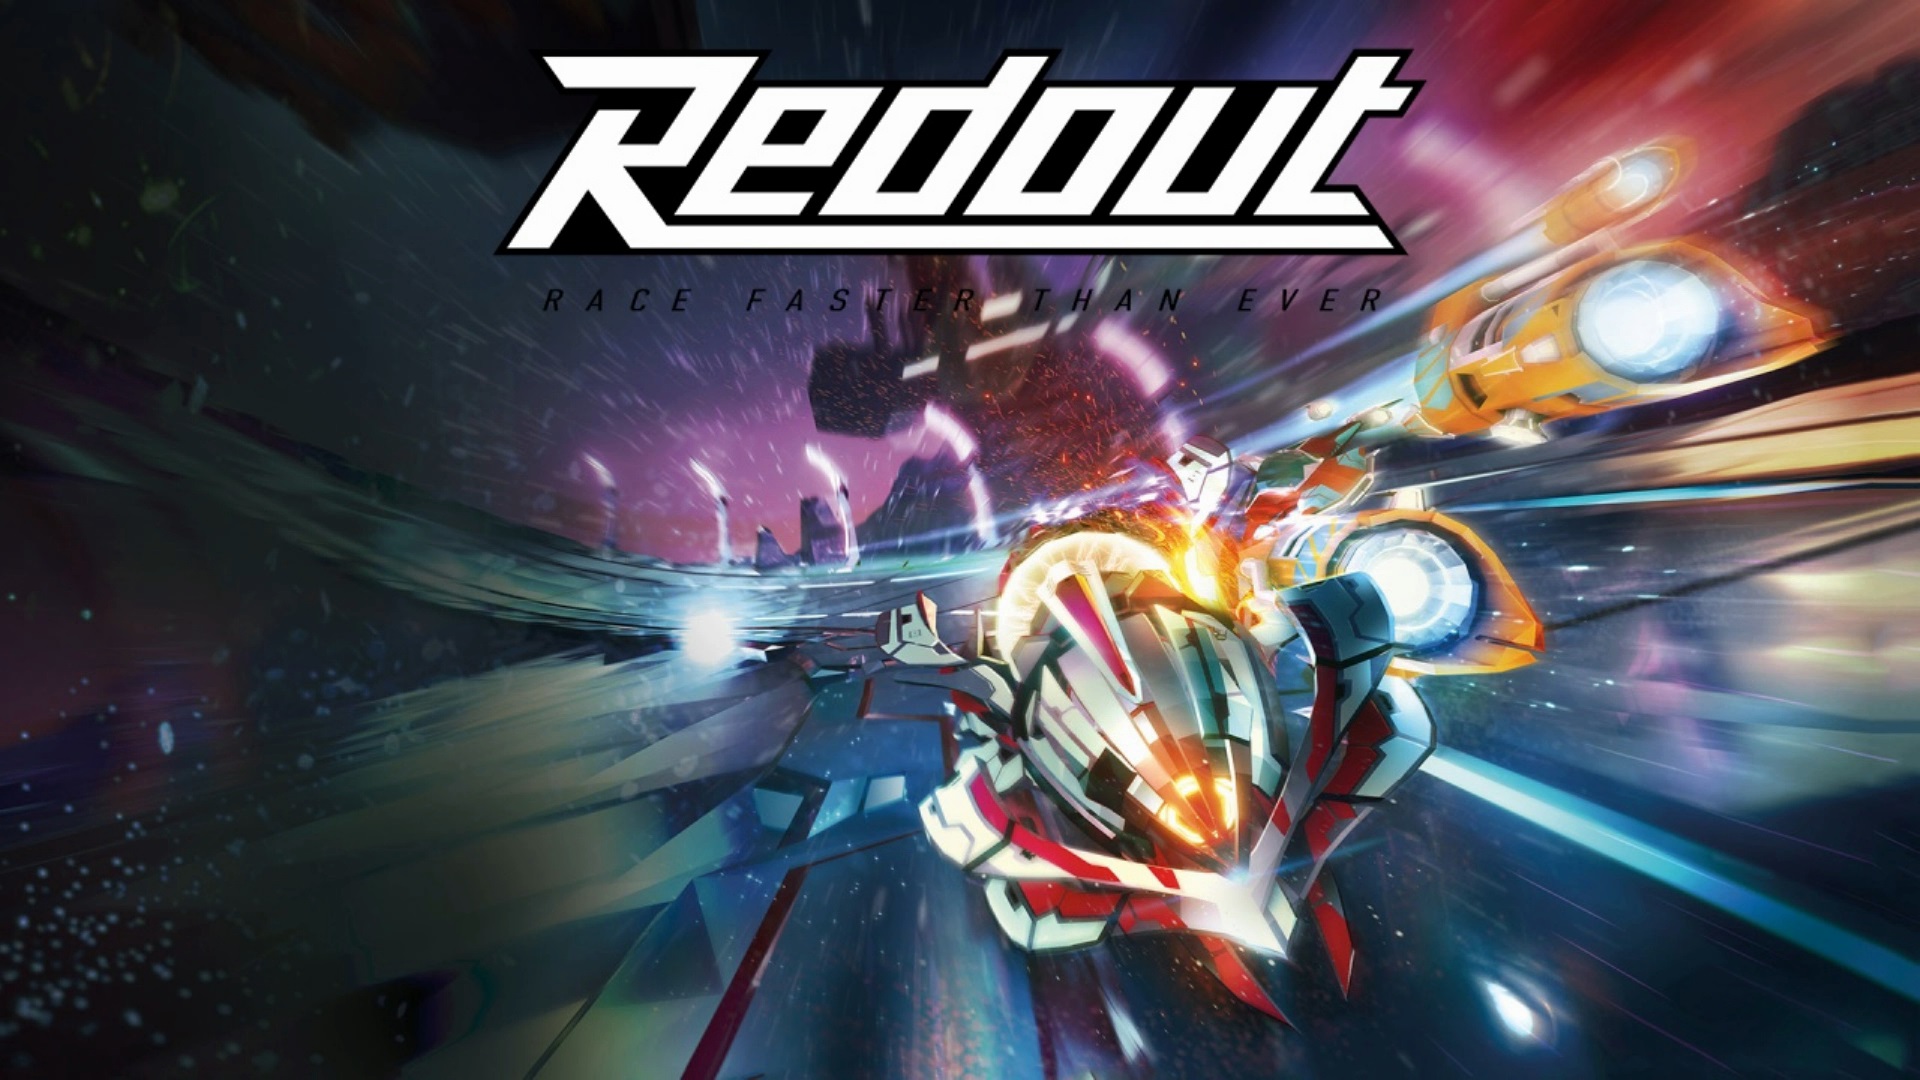 Redout seems to finally be releasing on Switch next month